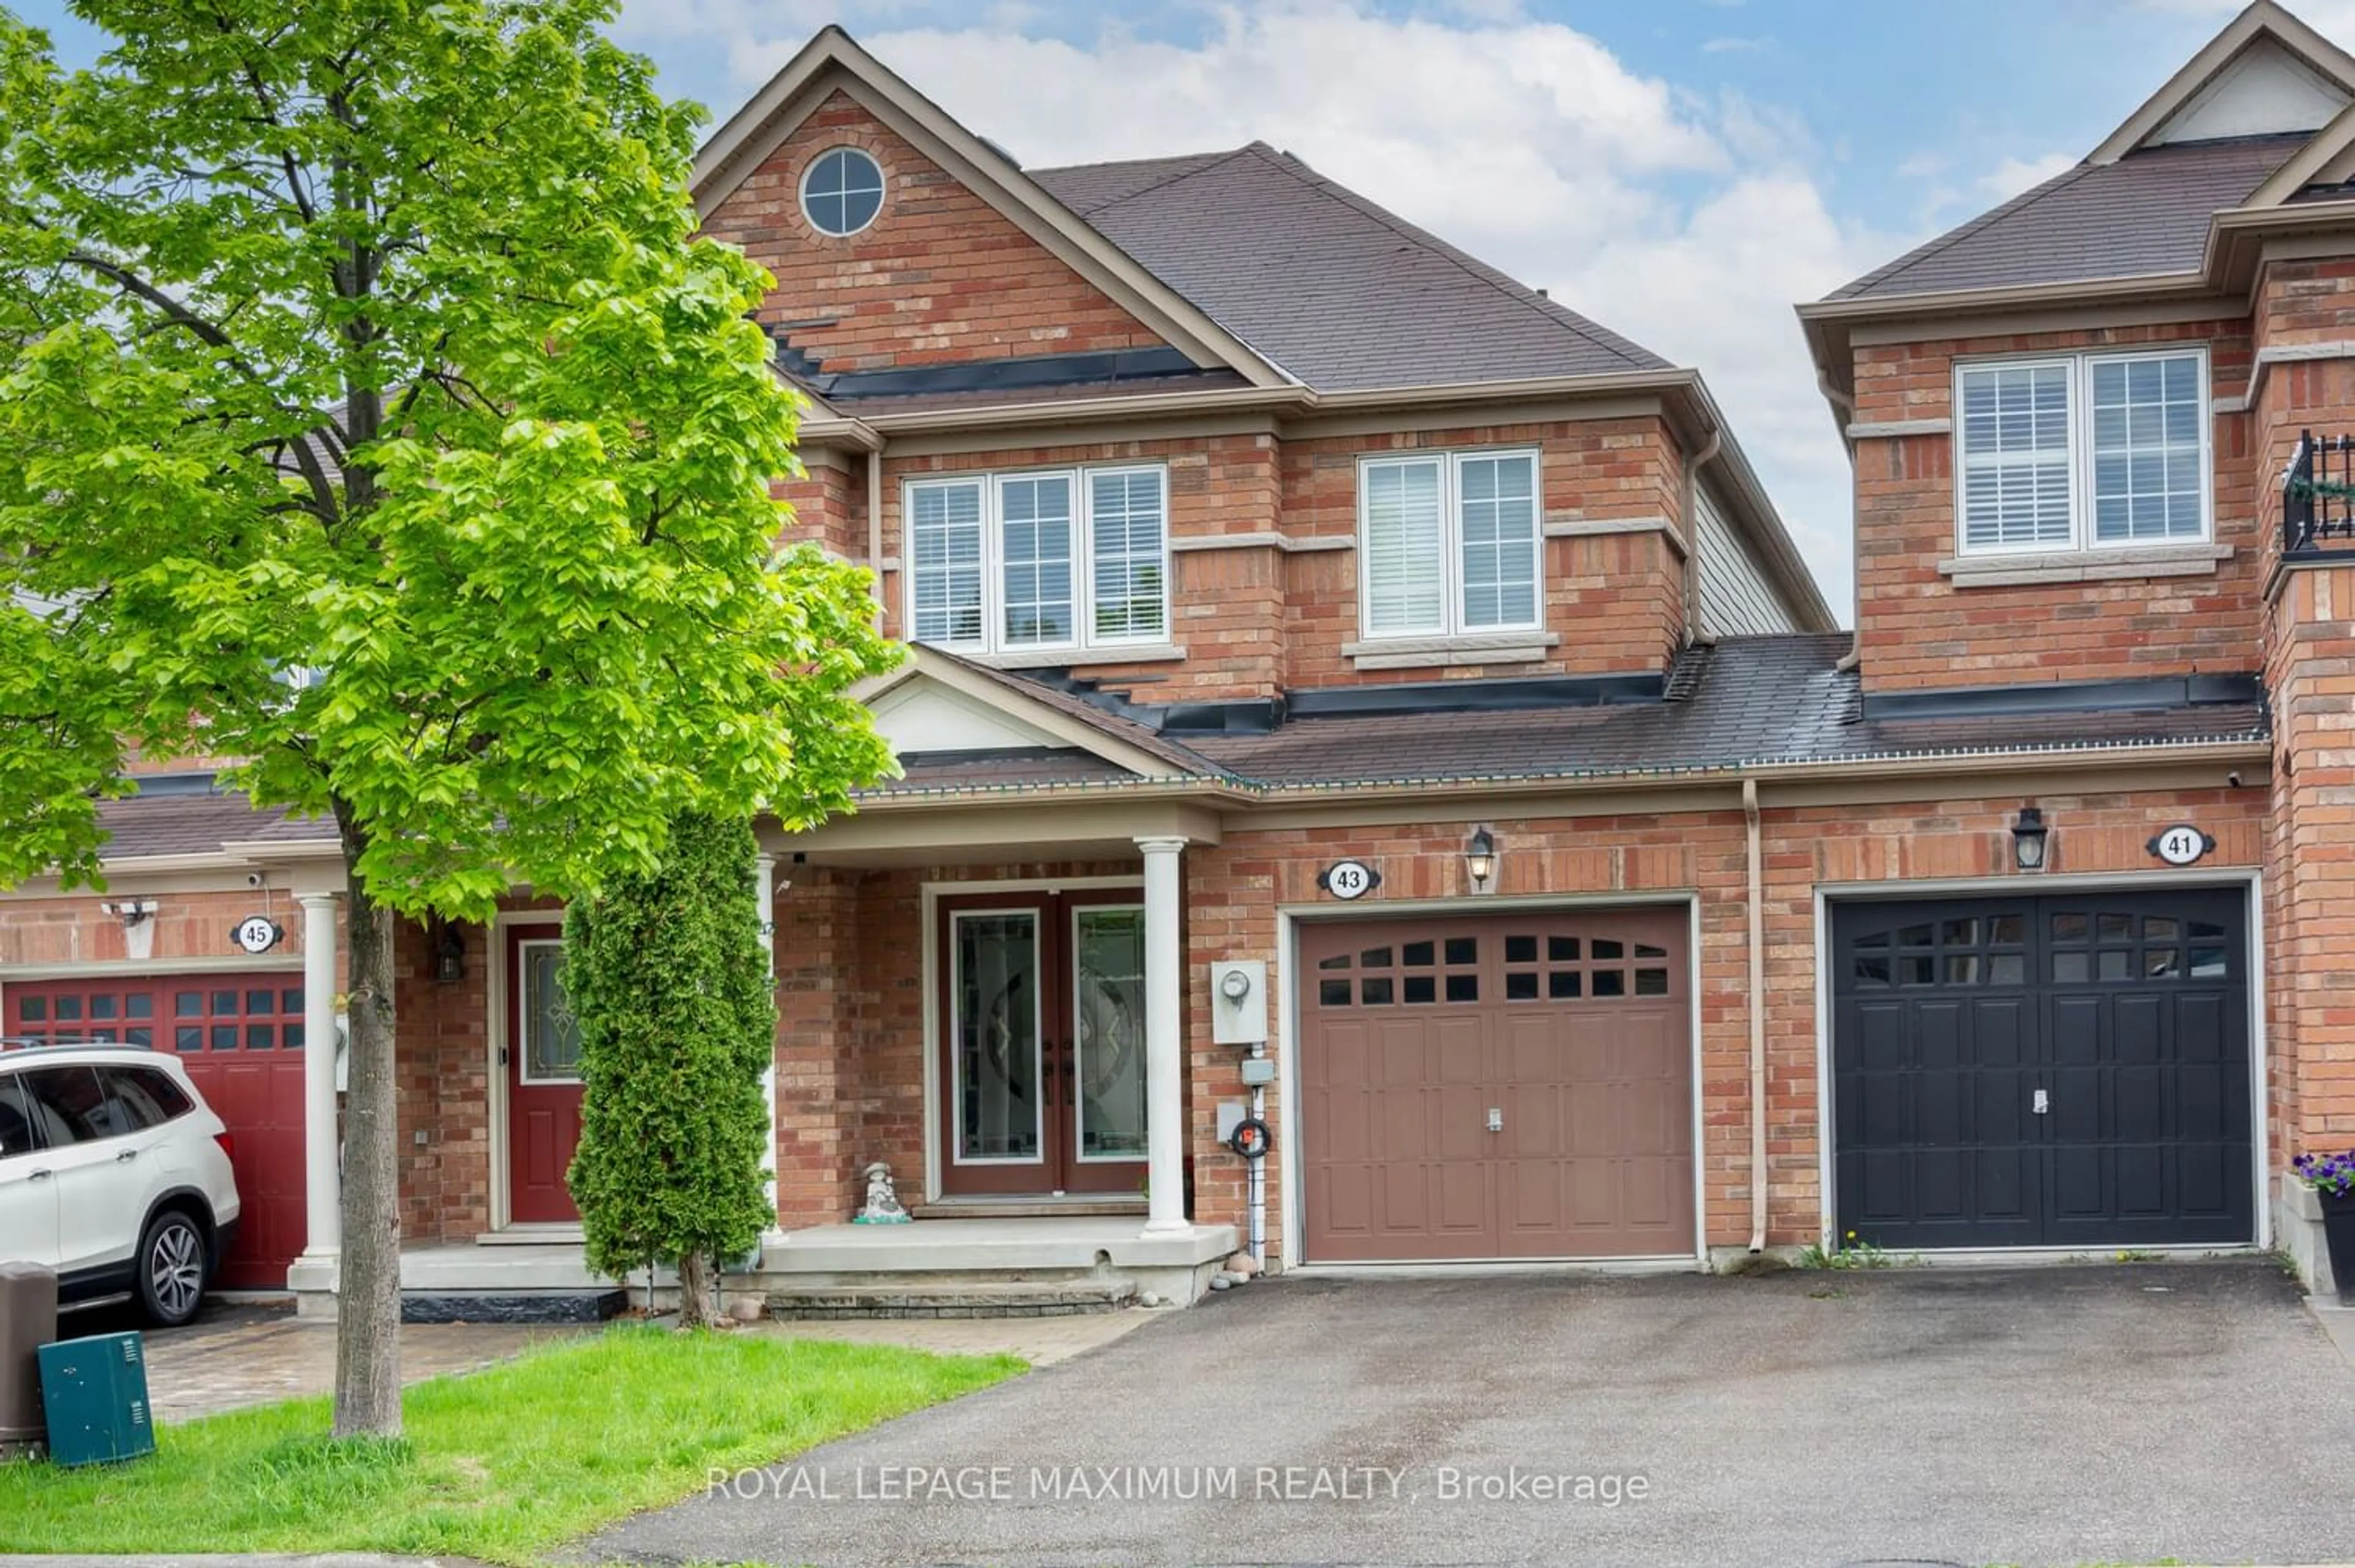 Home with brick exterior material for 43 Brahm Crt, Vaughan Ontario L4H 0K3